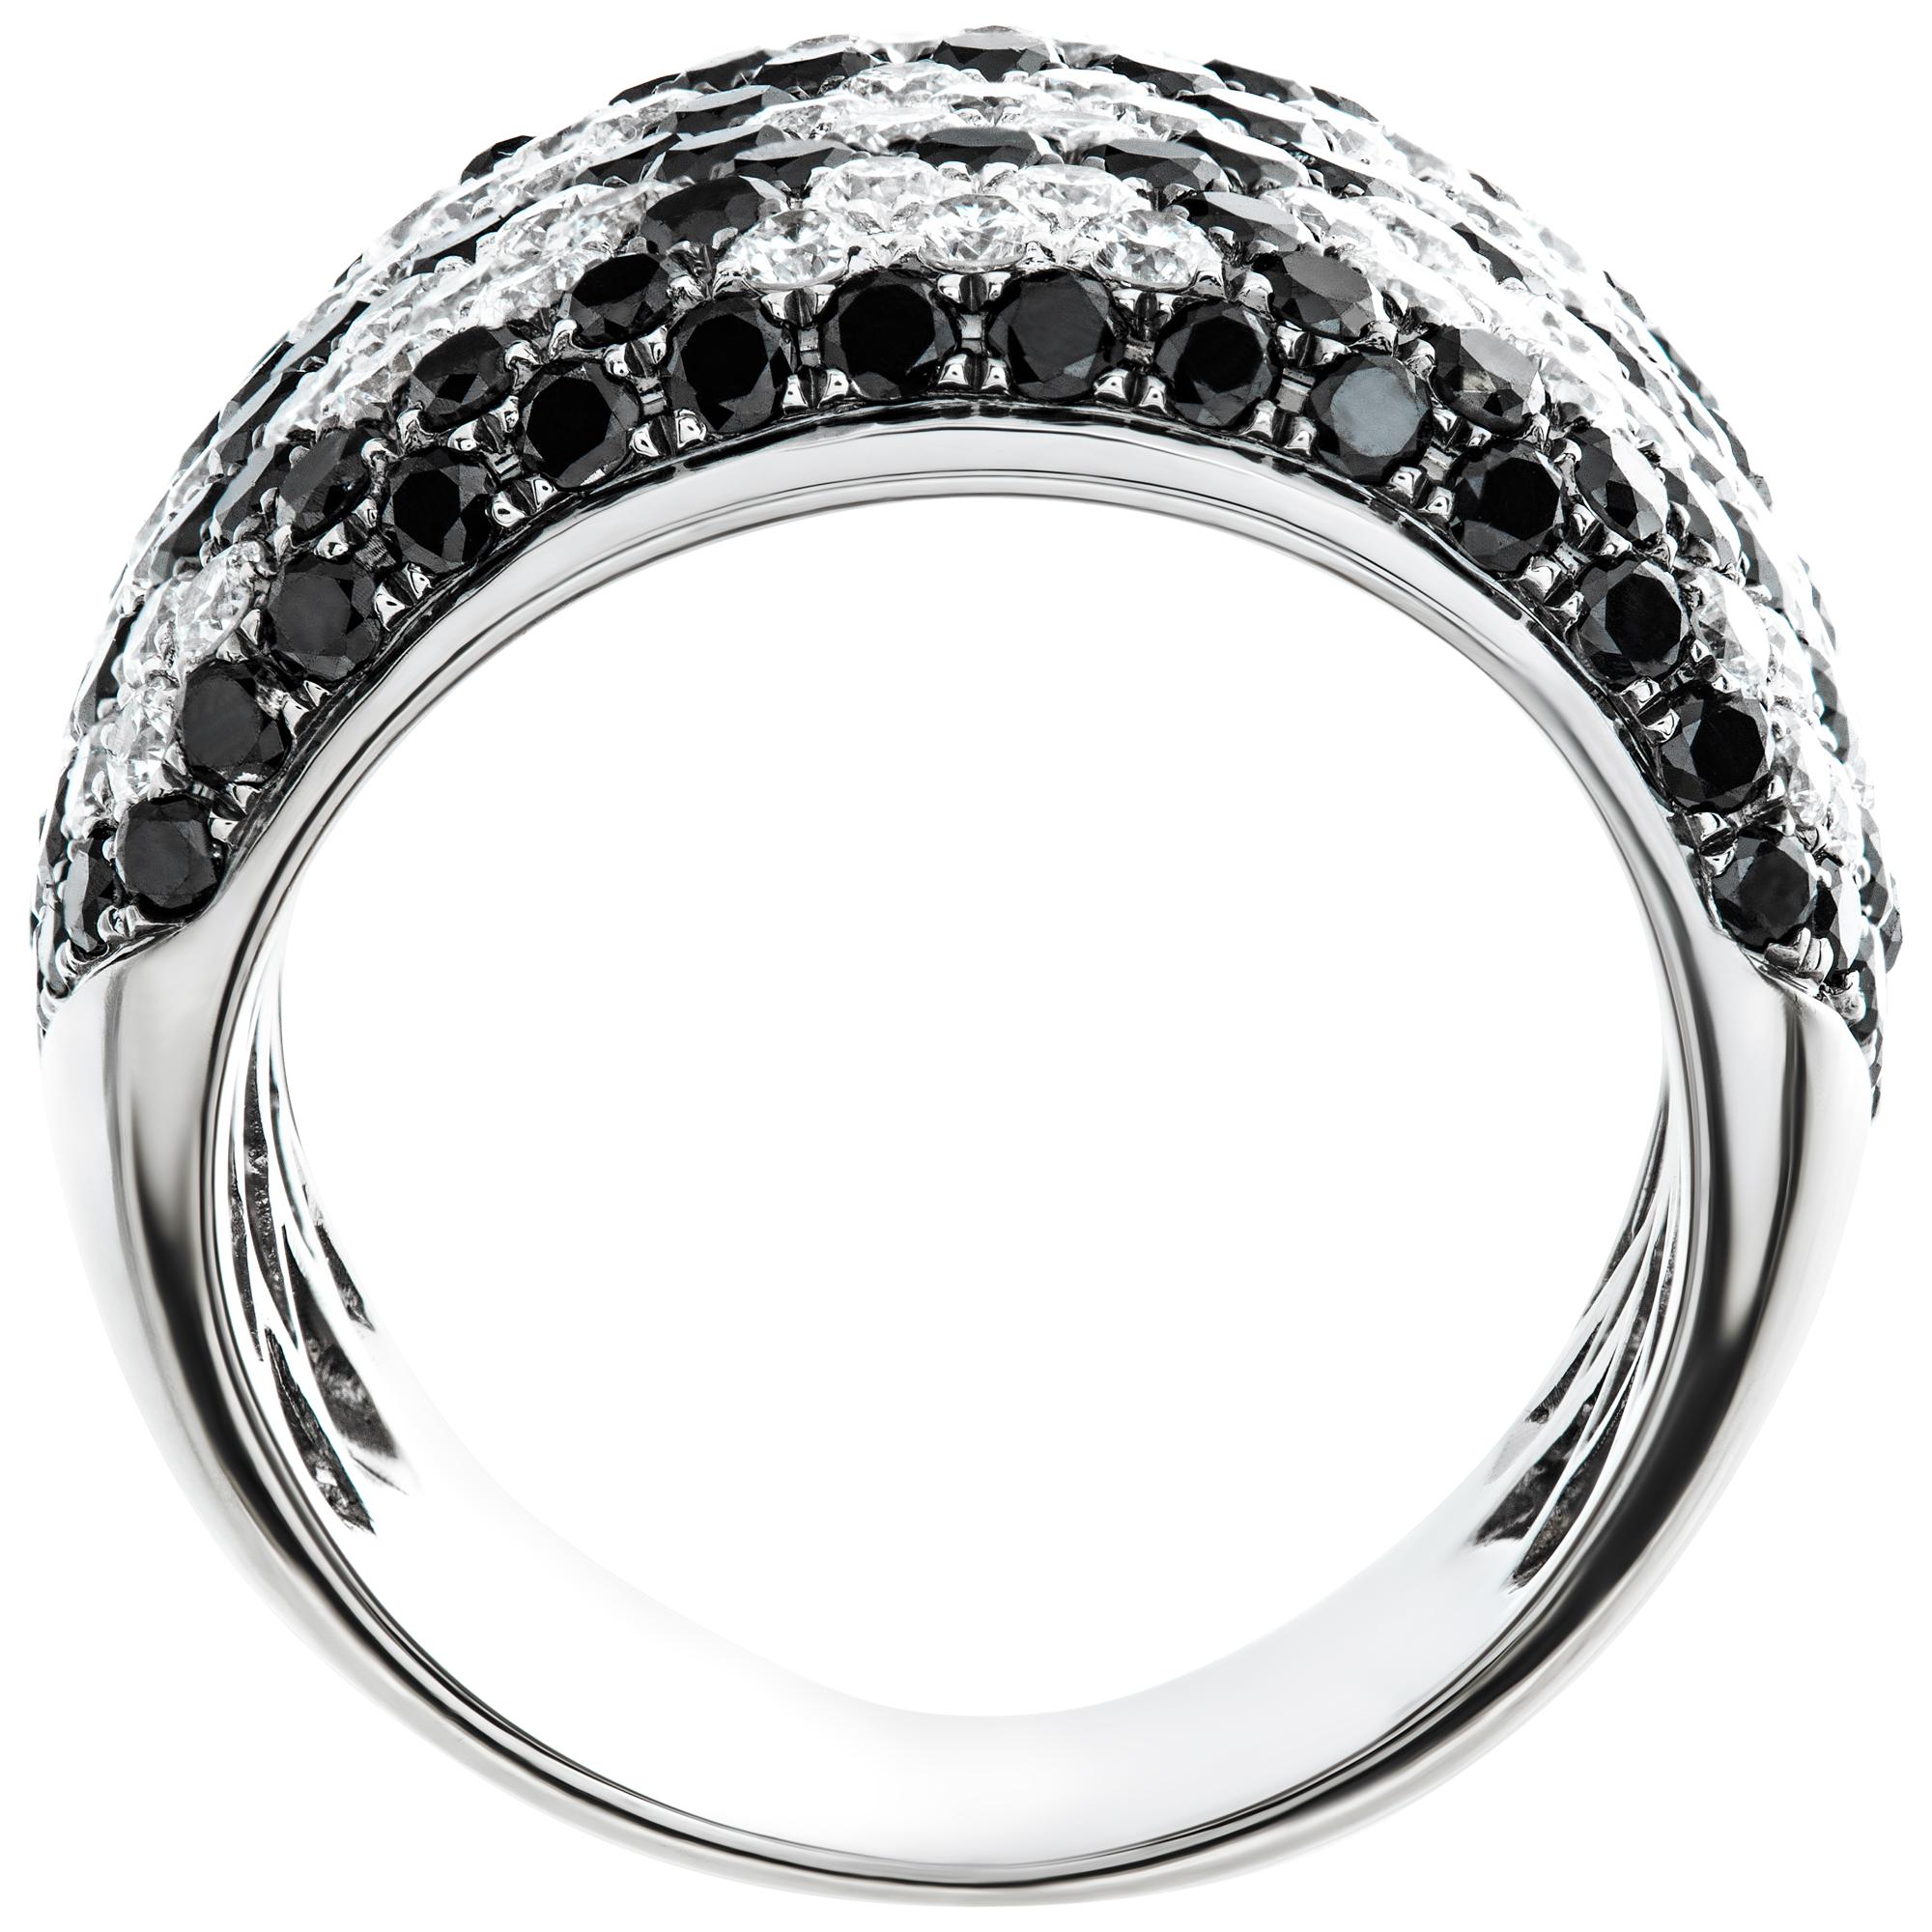 Women's B&W diamonds ring set in white gold diamonds approx weight 3.00 carats Size 5. For Sale